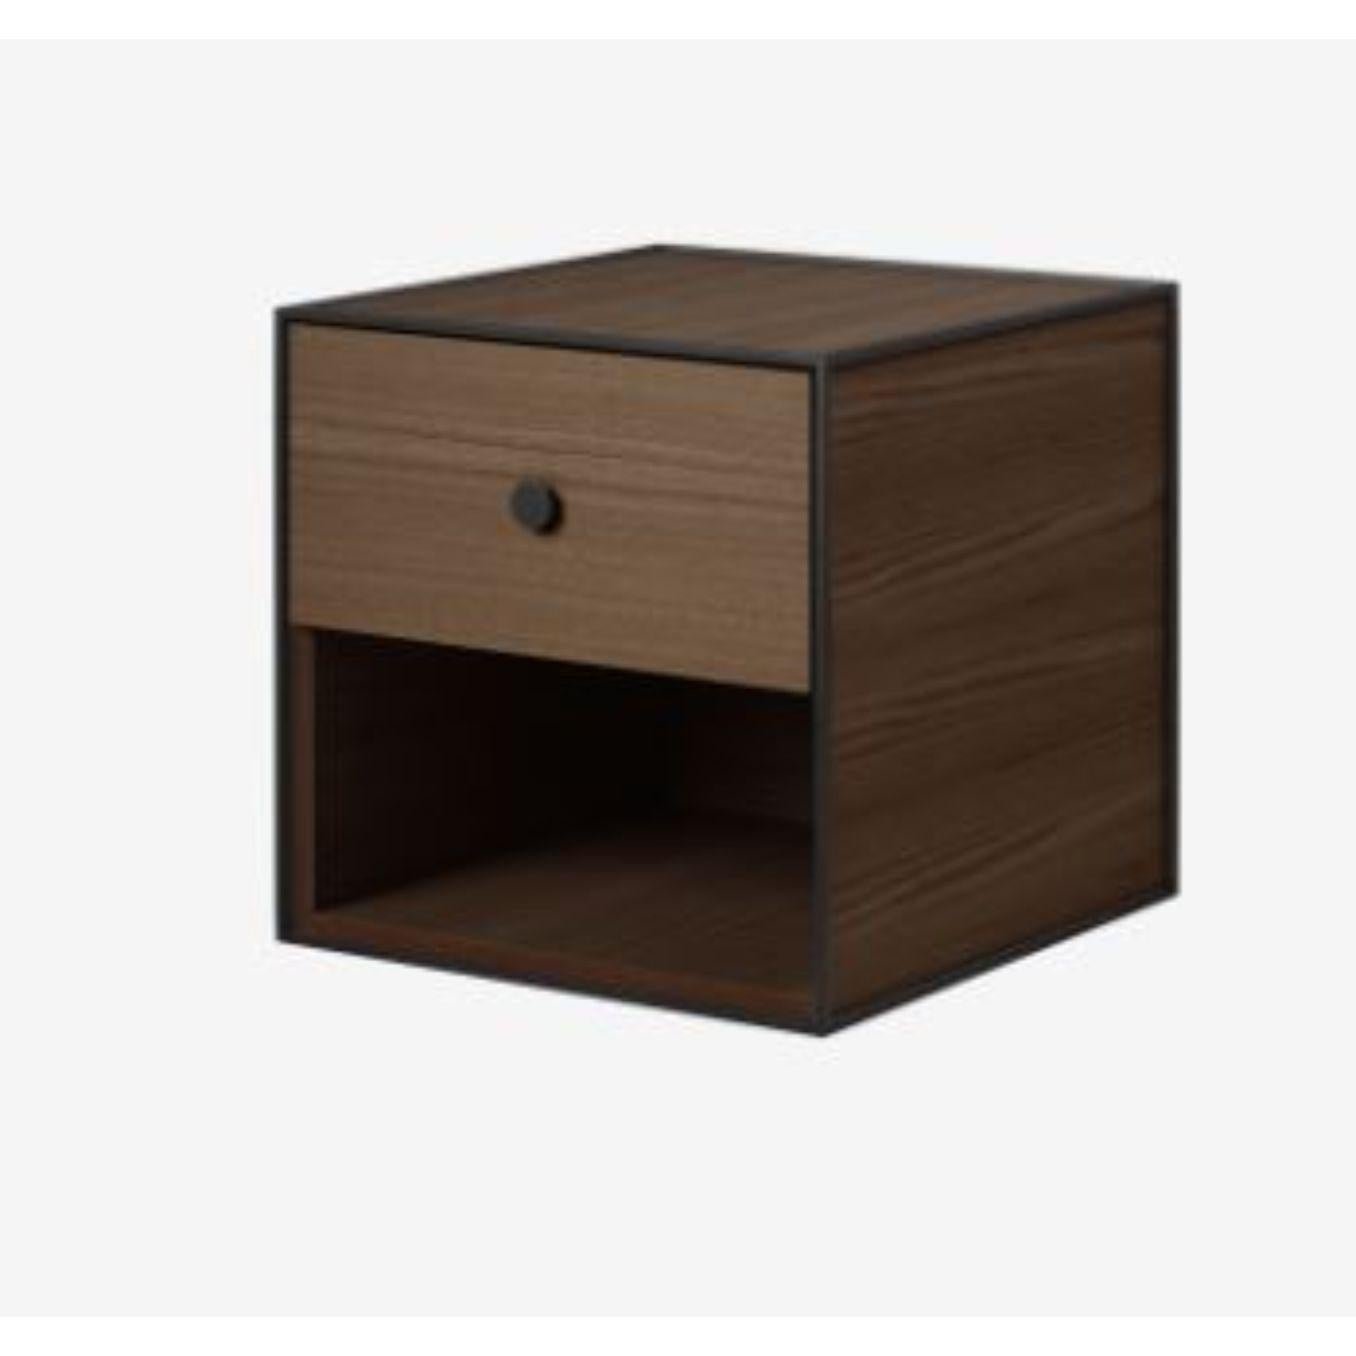 35 smoked oak frame box with 1 drawer by Lassen
Dimensions: w 35 x d 35 x h 35 cm 
Materials: Finér, Melamin, Melamin, Melamine, Metal, Veneer, Oak
Also available in different colors and dimensions. 

By Lassen is a Danish design brand focused